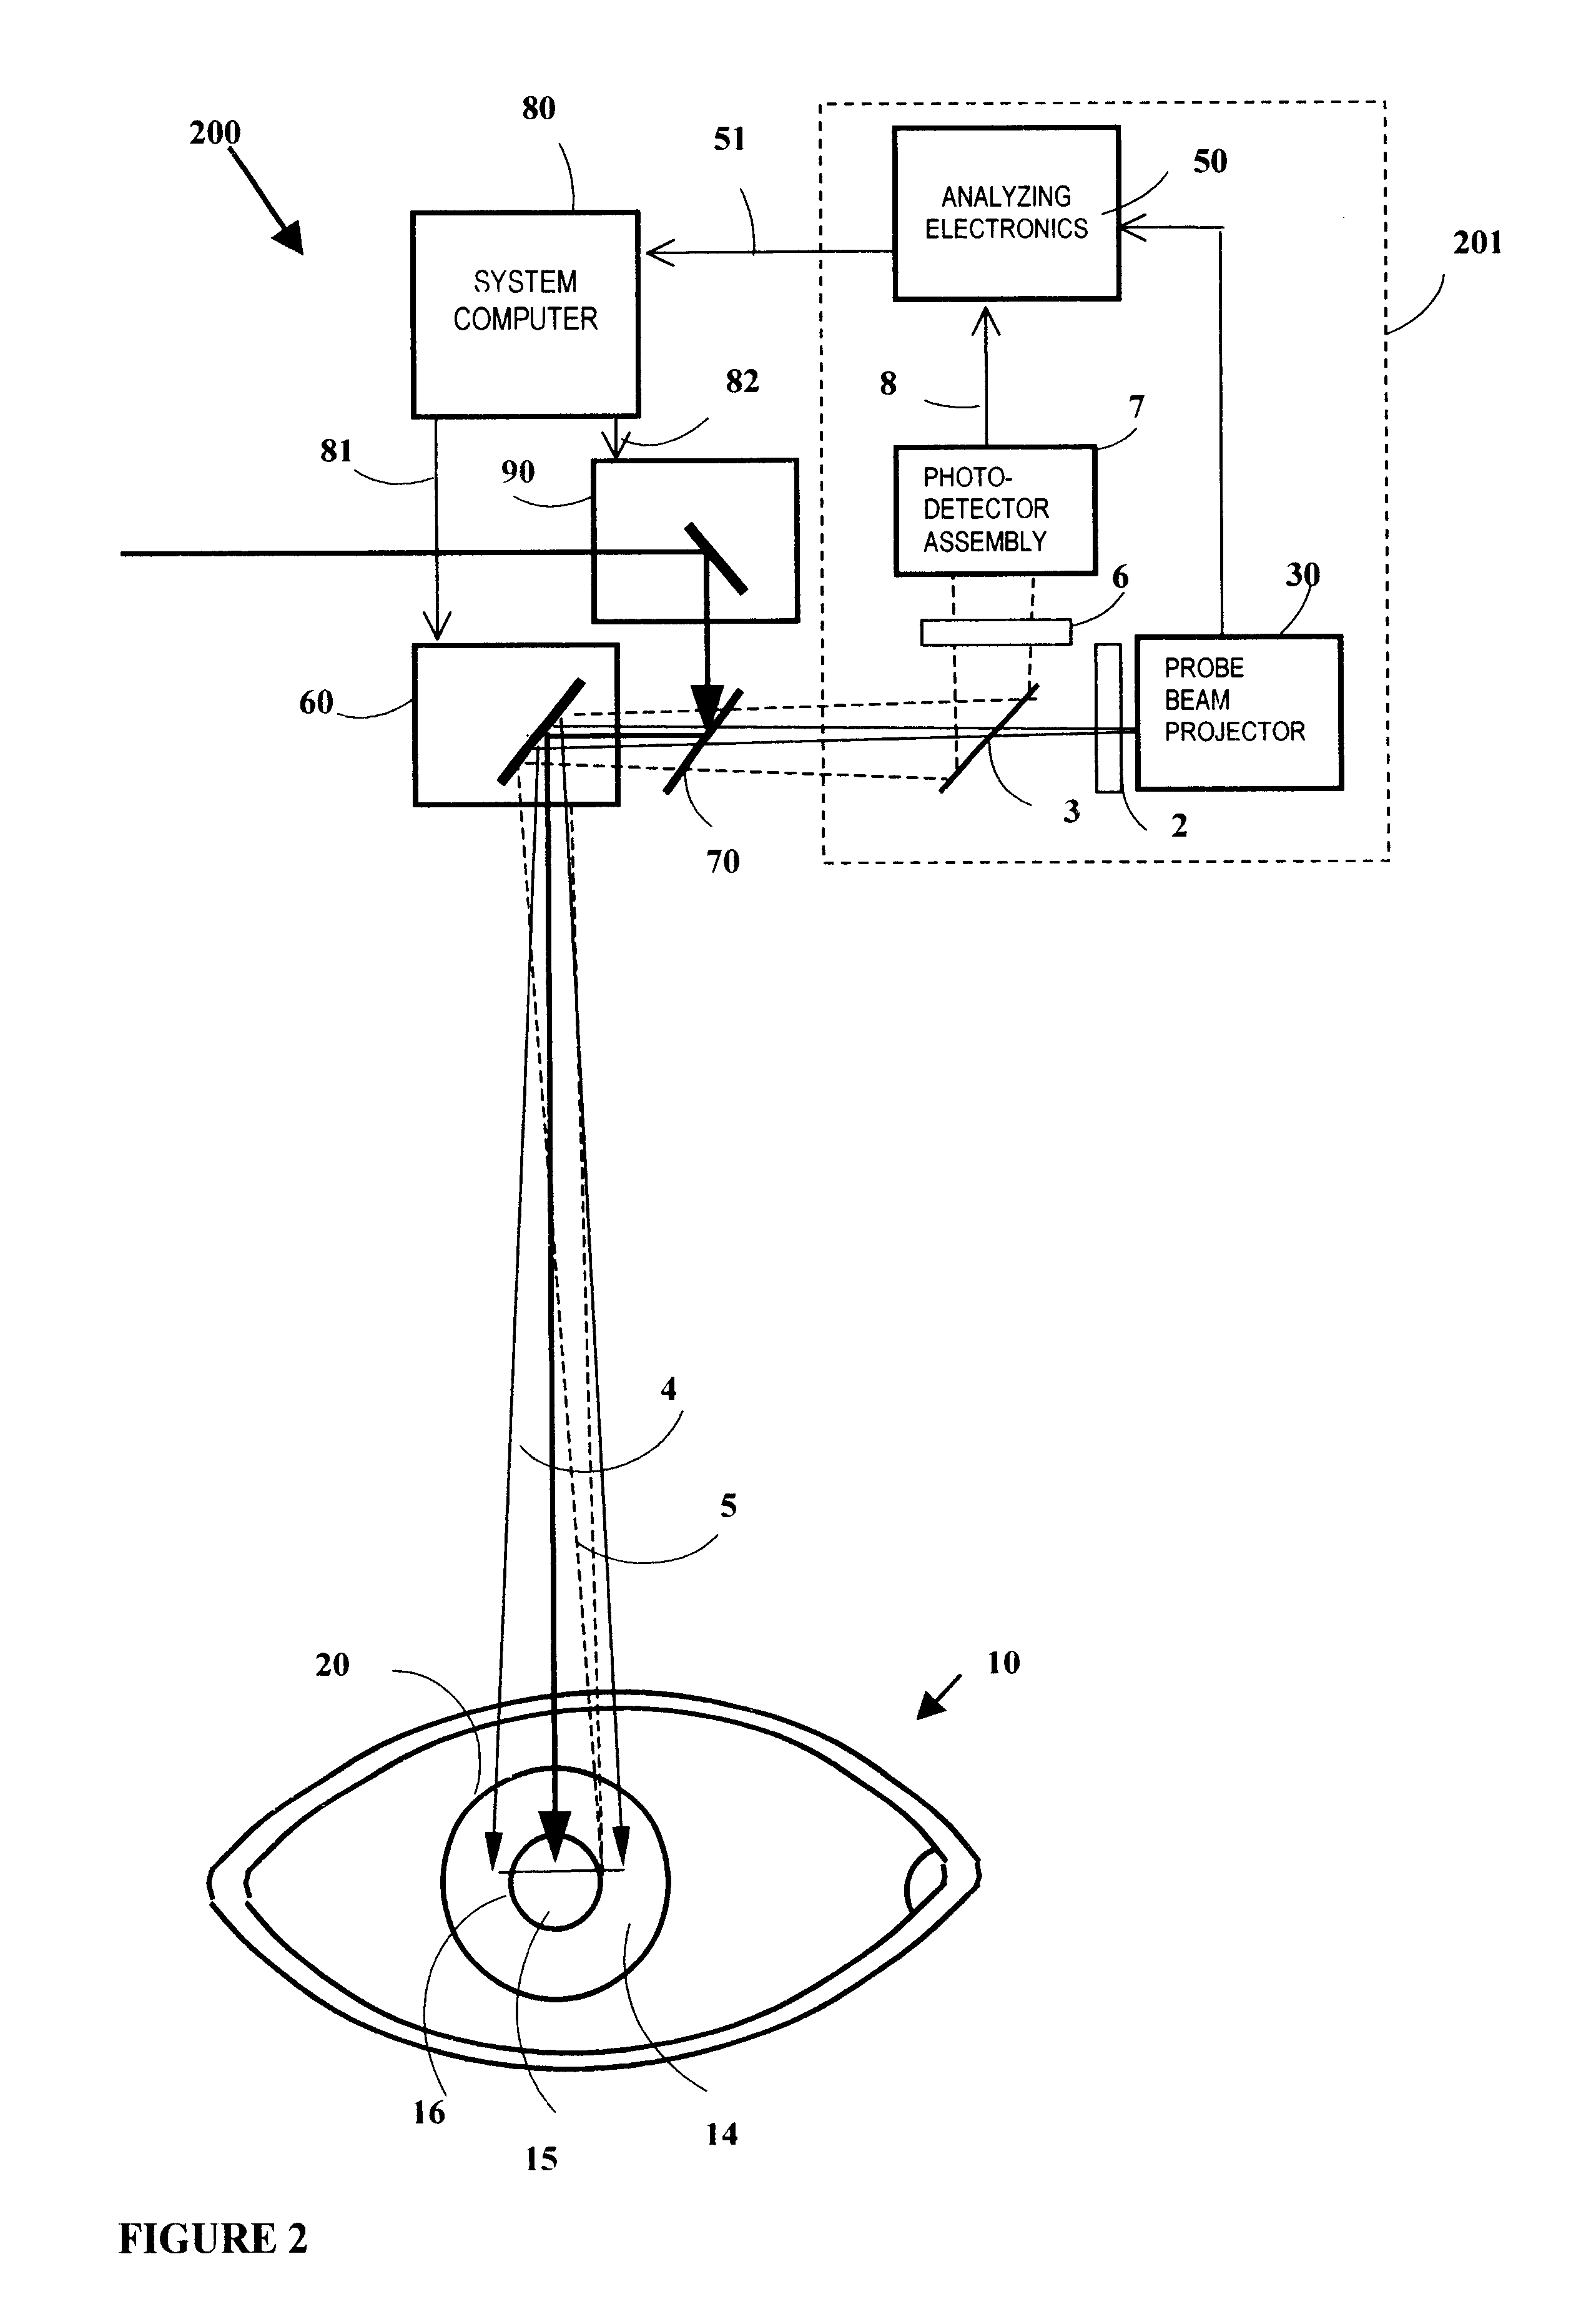 Optical tracking device employing scanning beams on symmetric reference